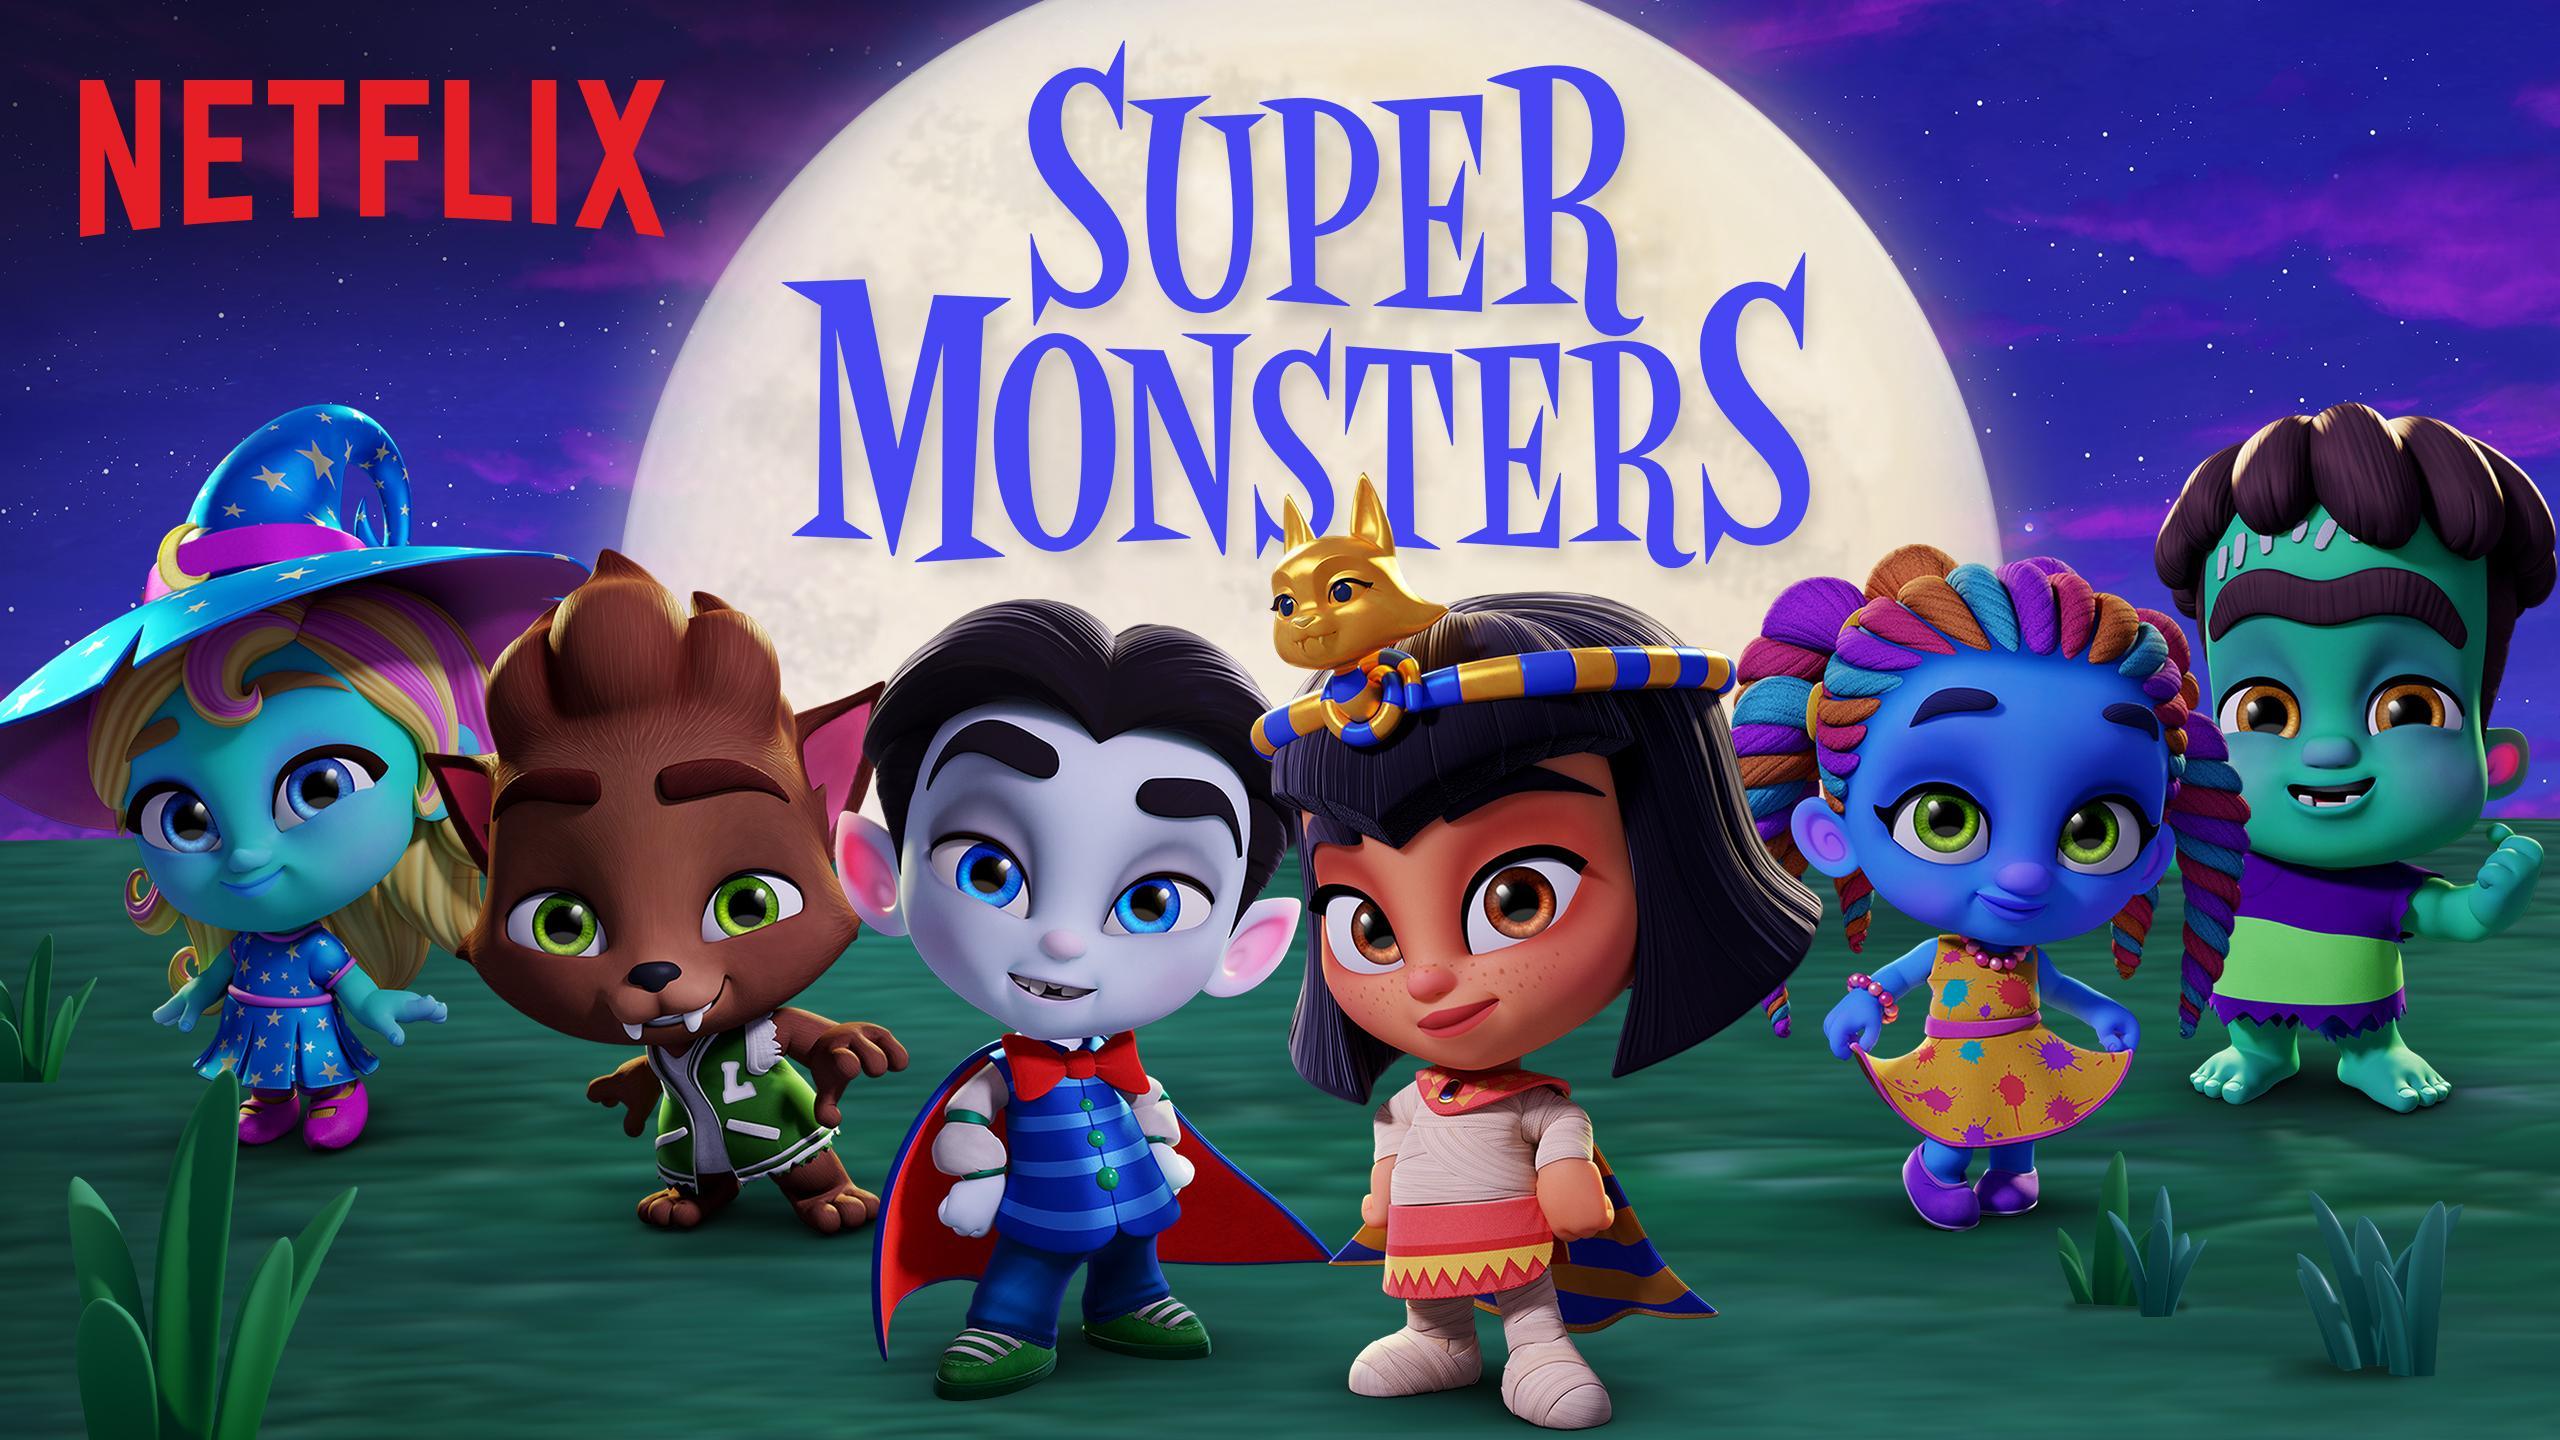 Super Monsters Characters Wallpapers